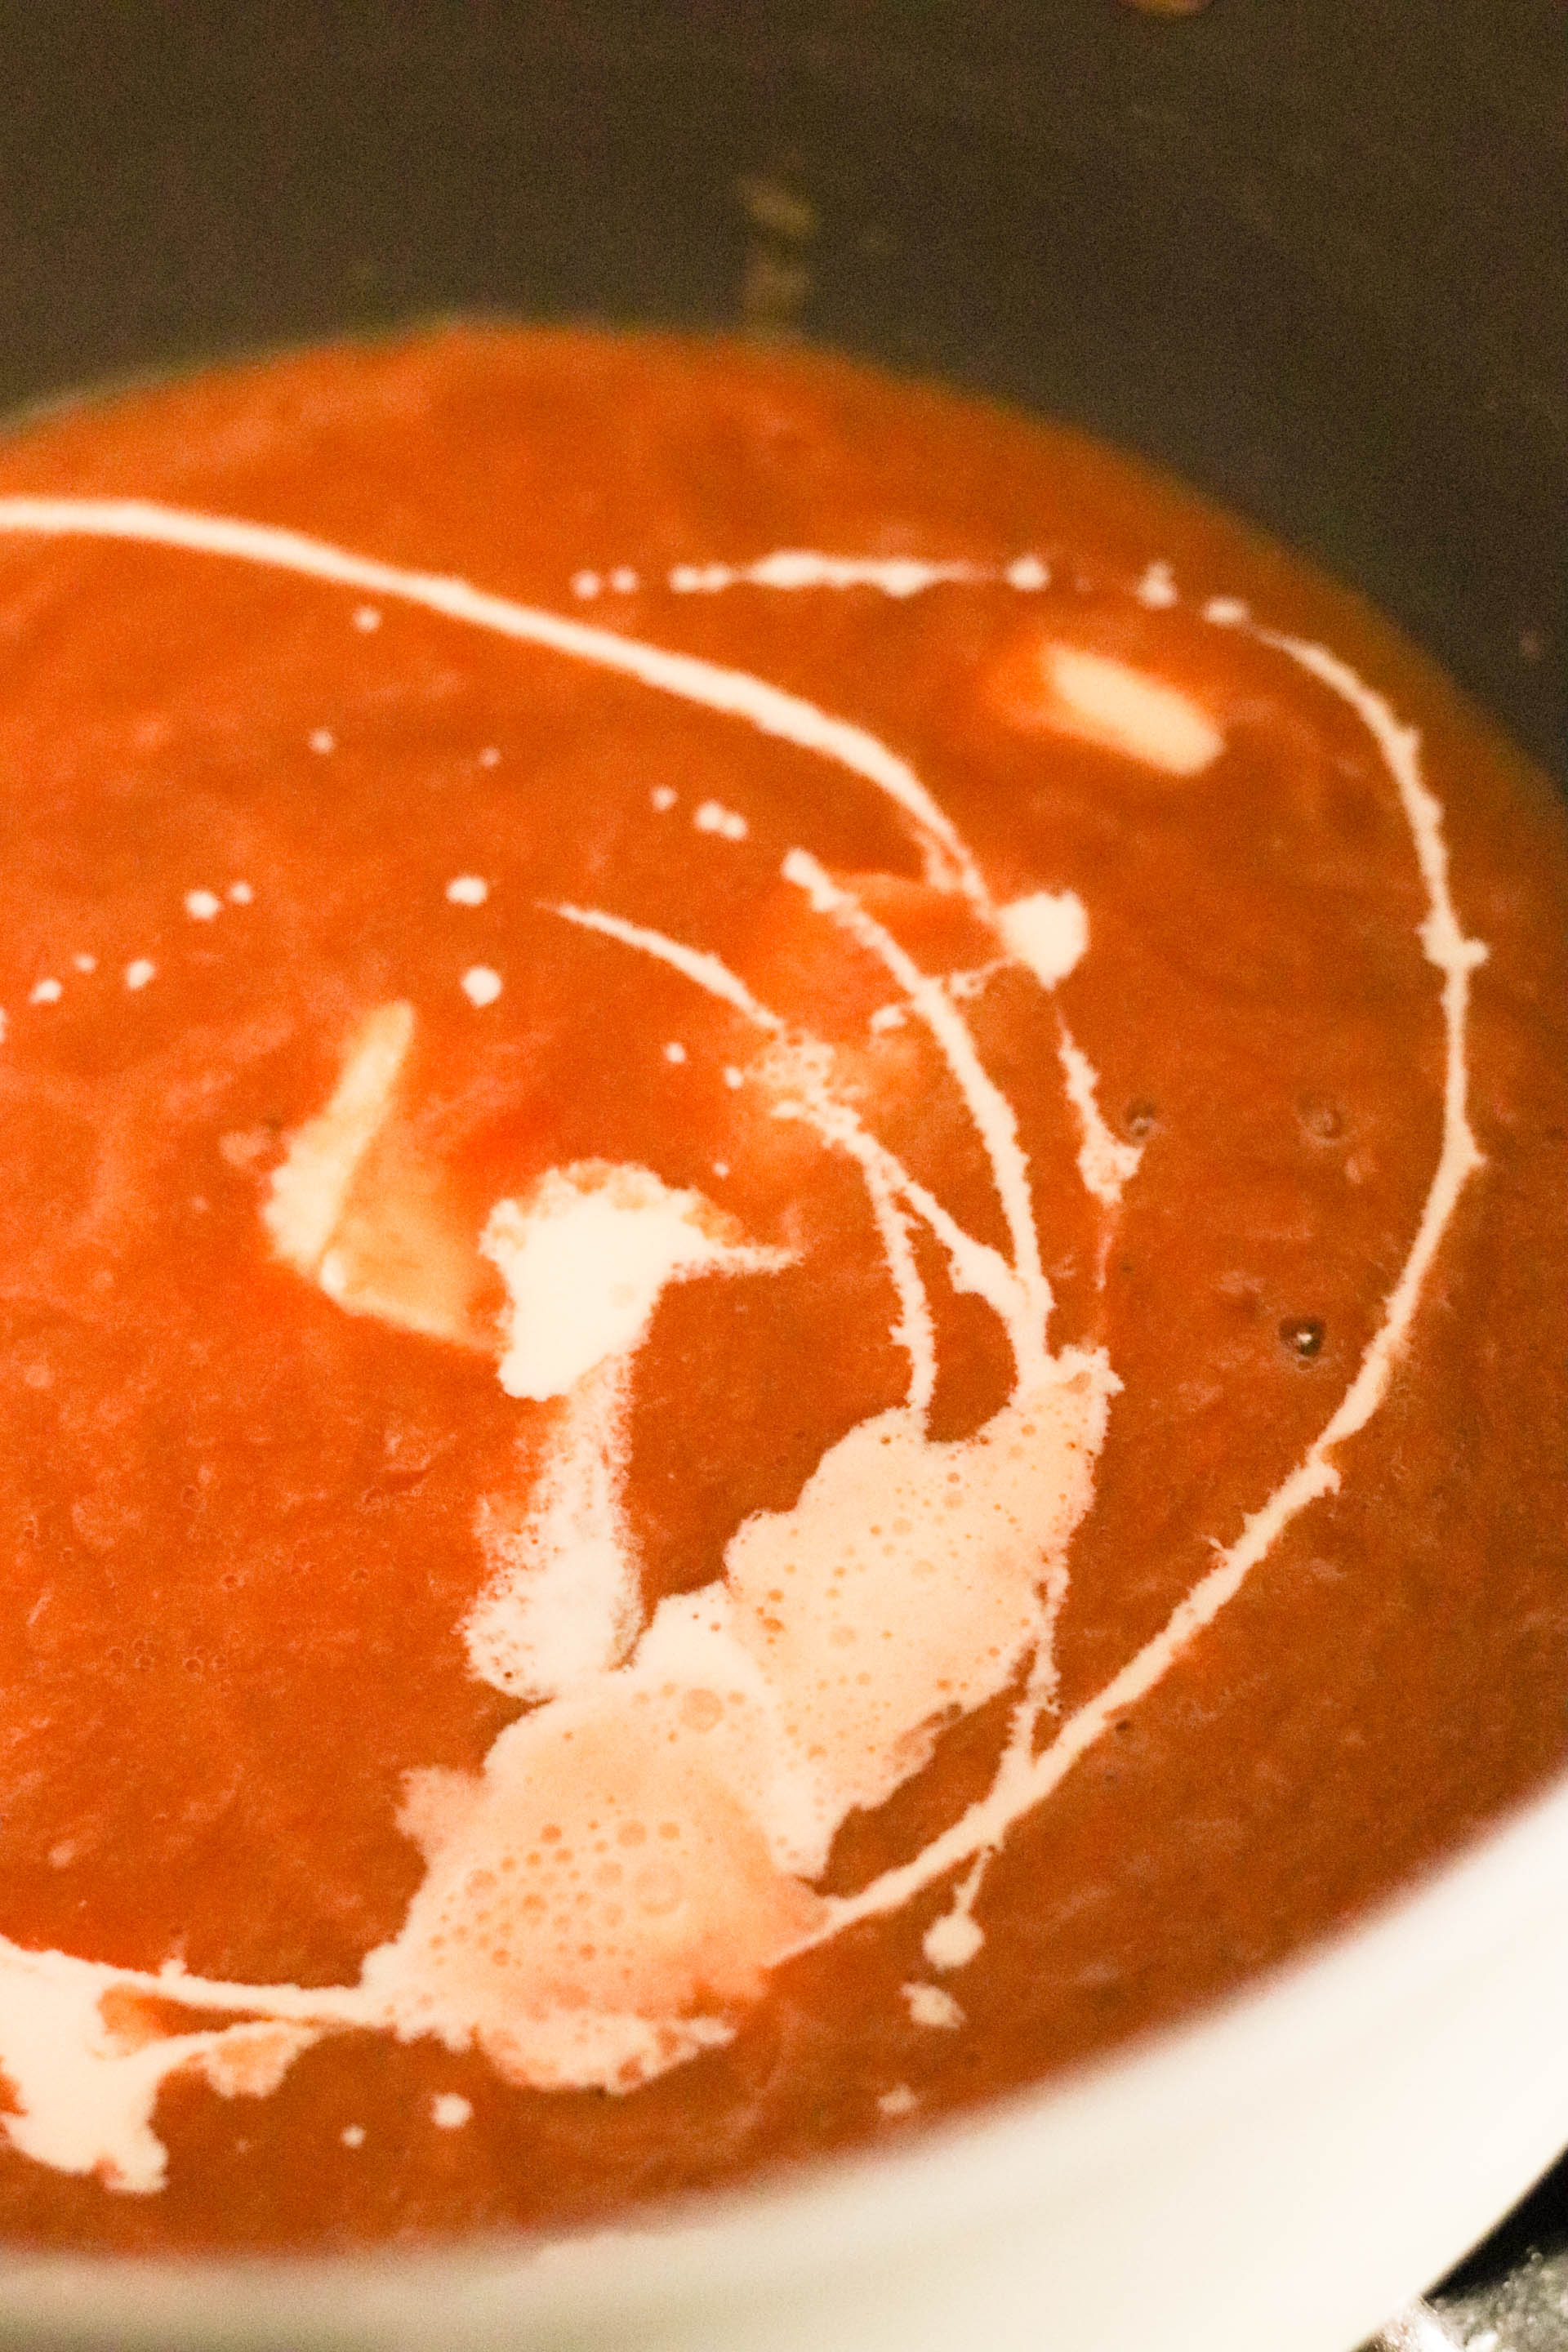 Cream and Butter added to tomato soup